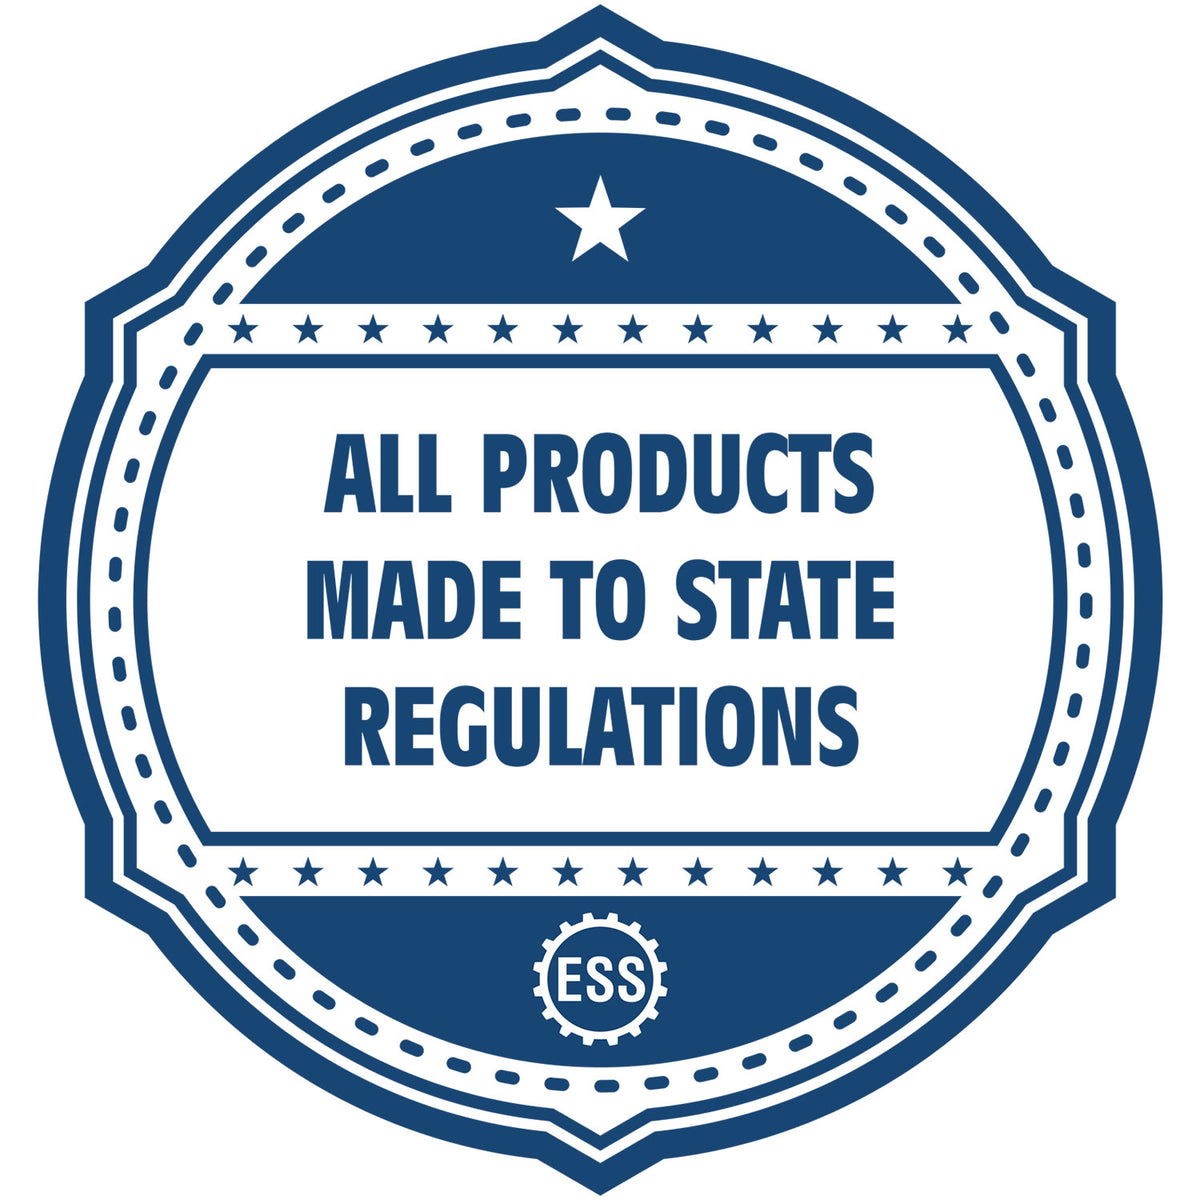 An icon or badge element for the Extended Long Reach Louisiana Architect Seal Embosser showing that this product is made in compliance with state regulations.